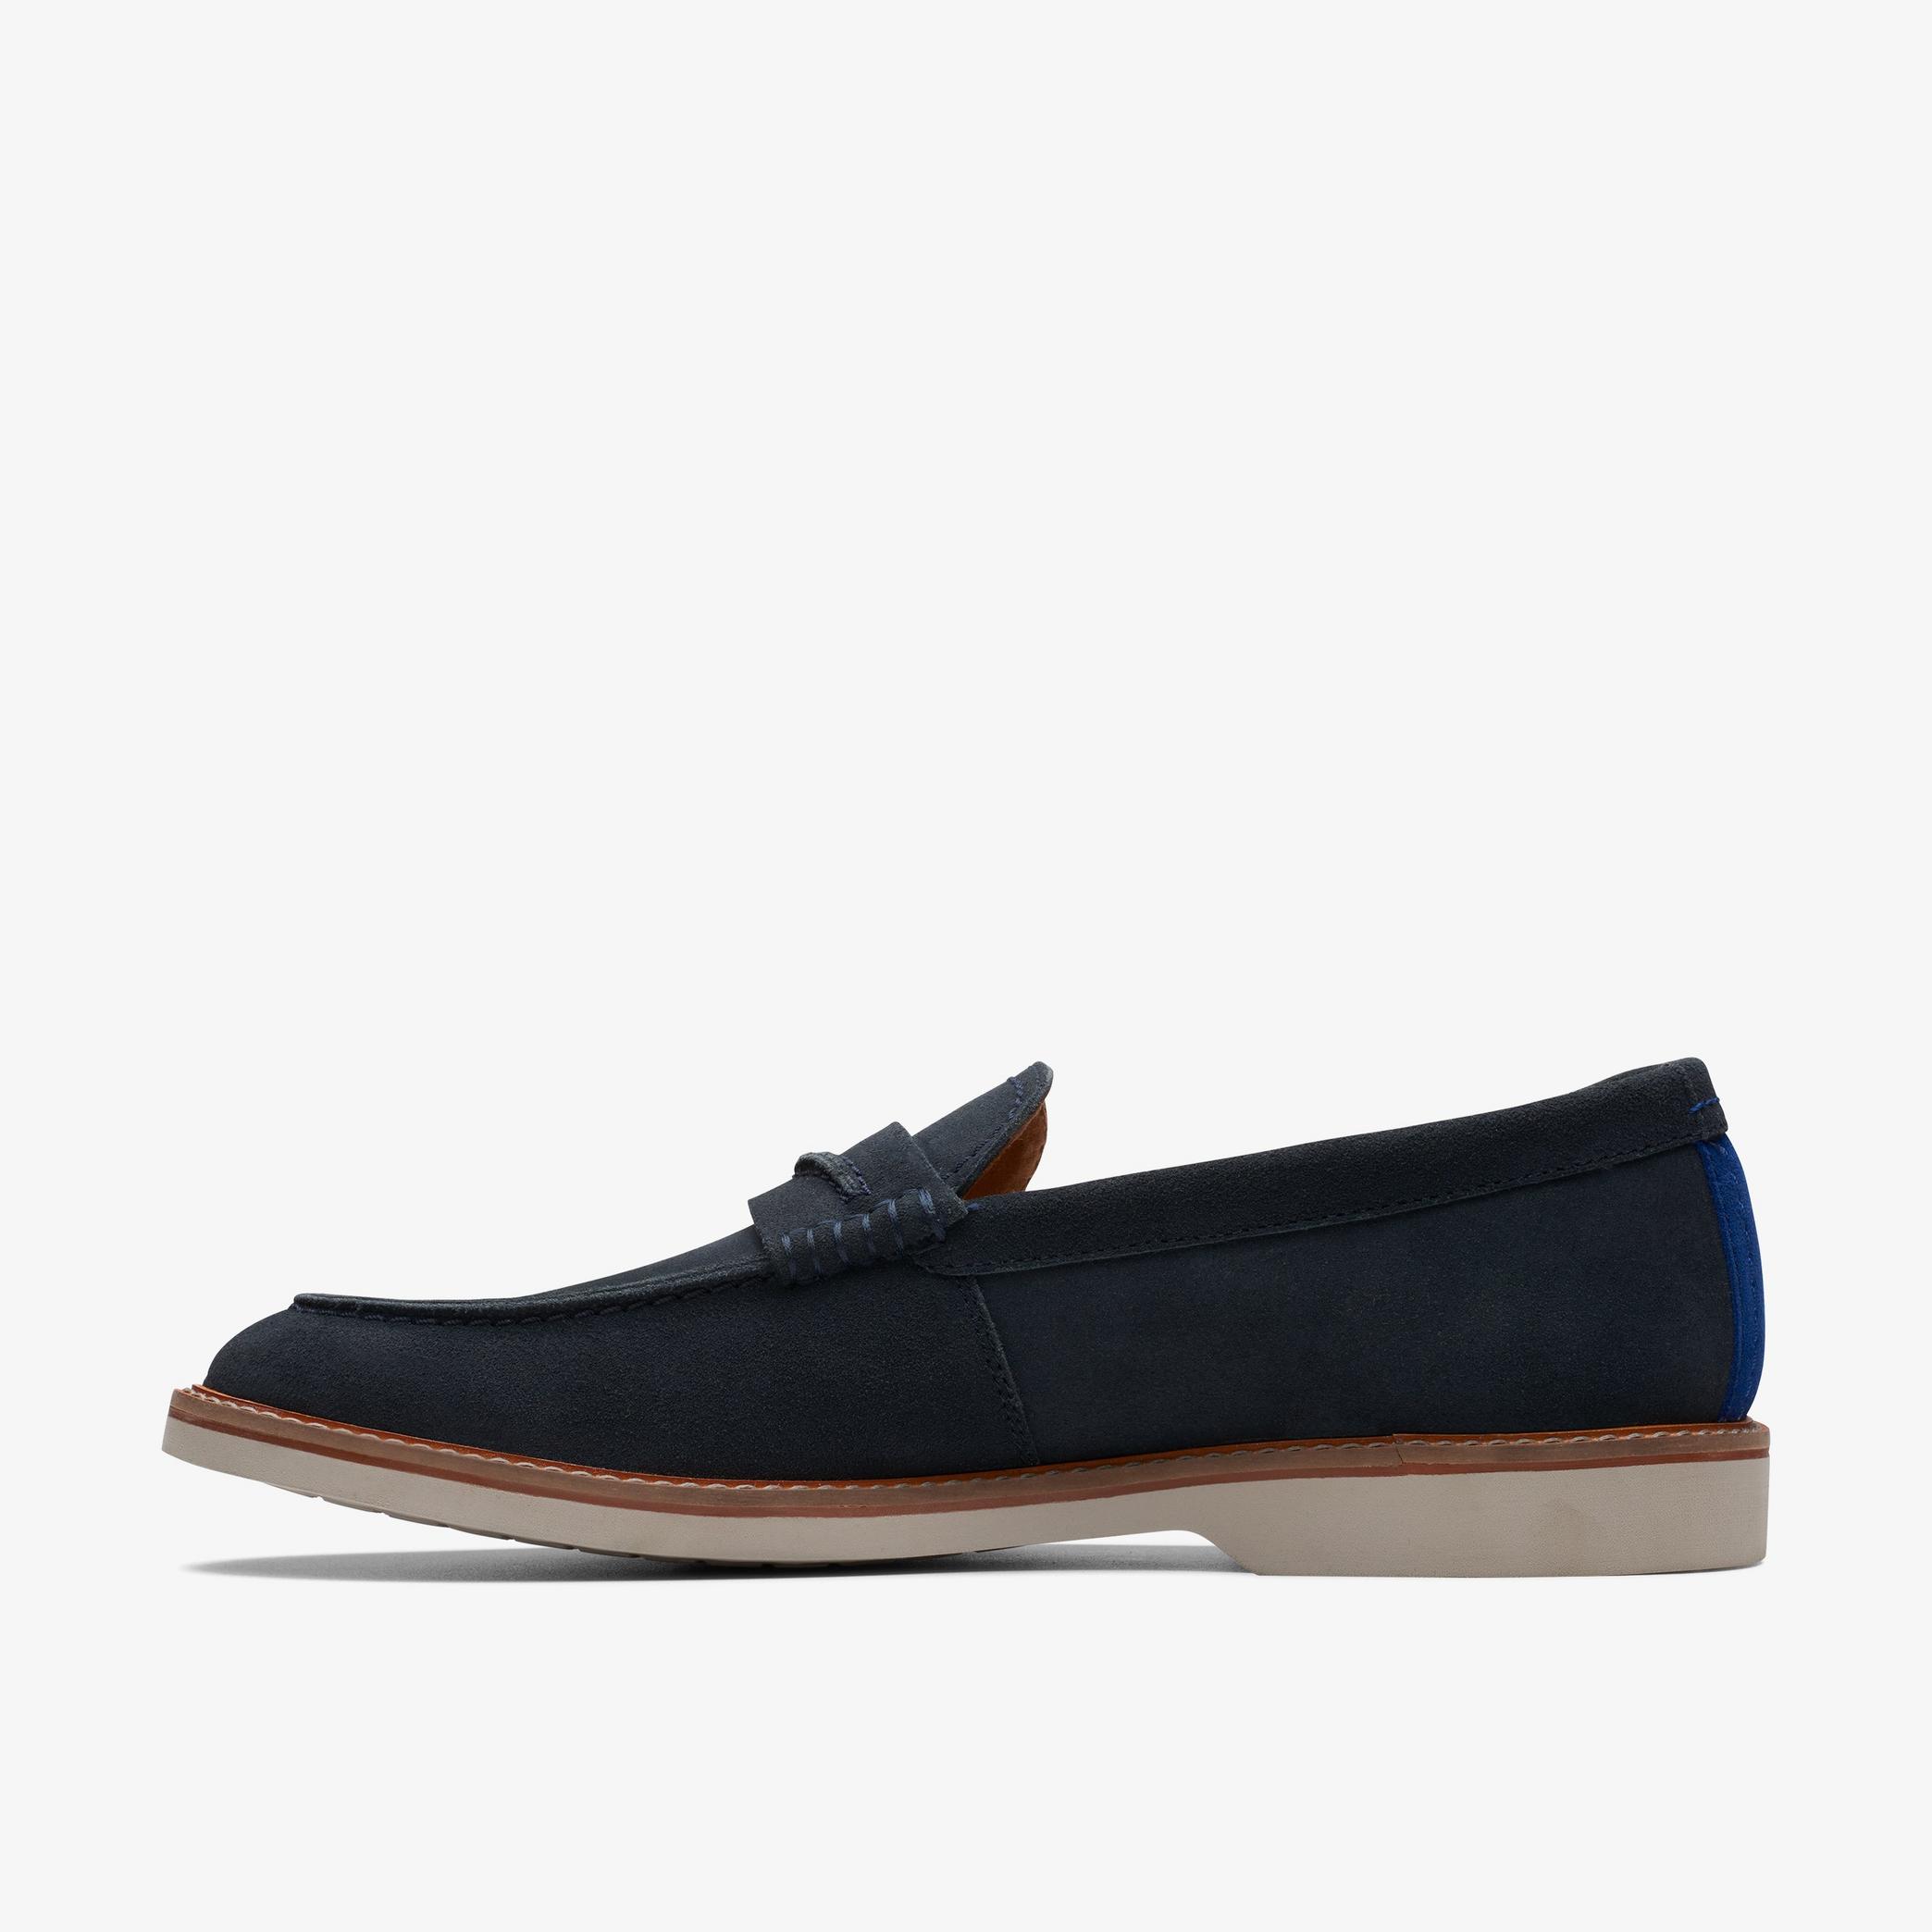 Atticus Slip Navy Suede Loafers, view 2 of 6